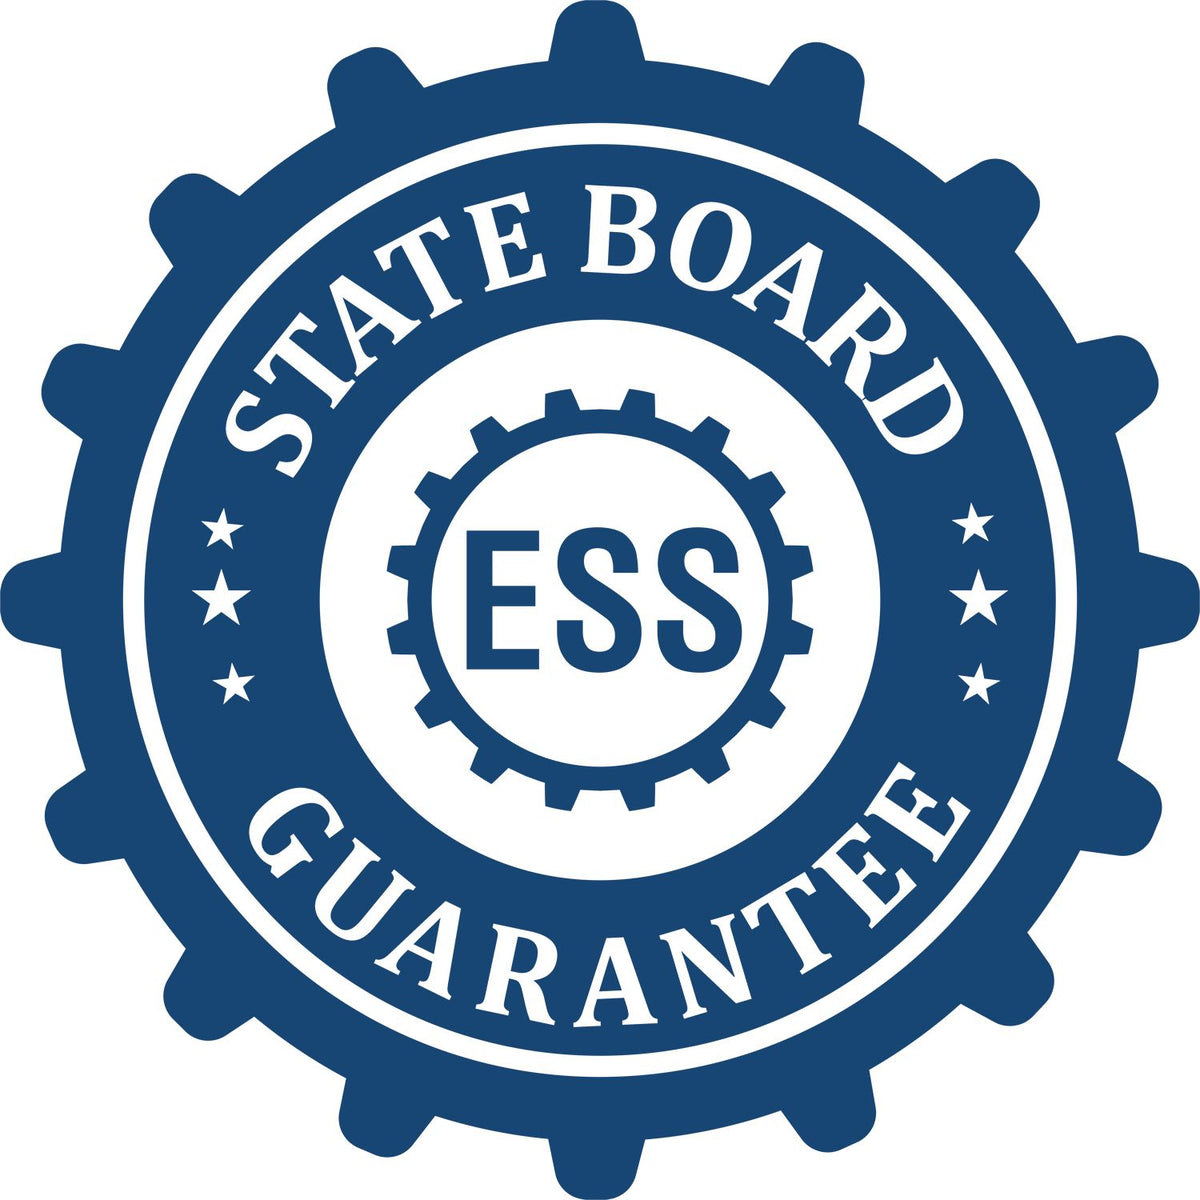 An emblem in a gear shape illustrating a state board guarantee for the Hybrid New Jersey Architect Seal